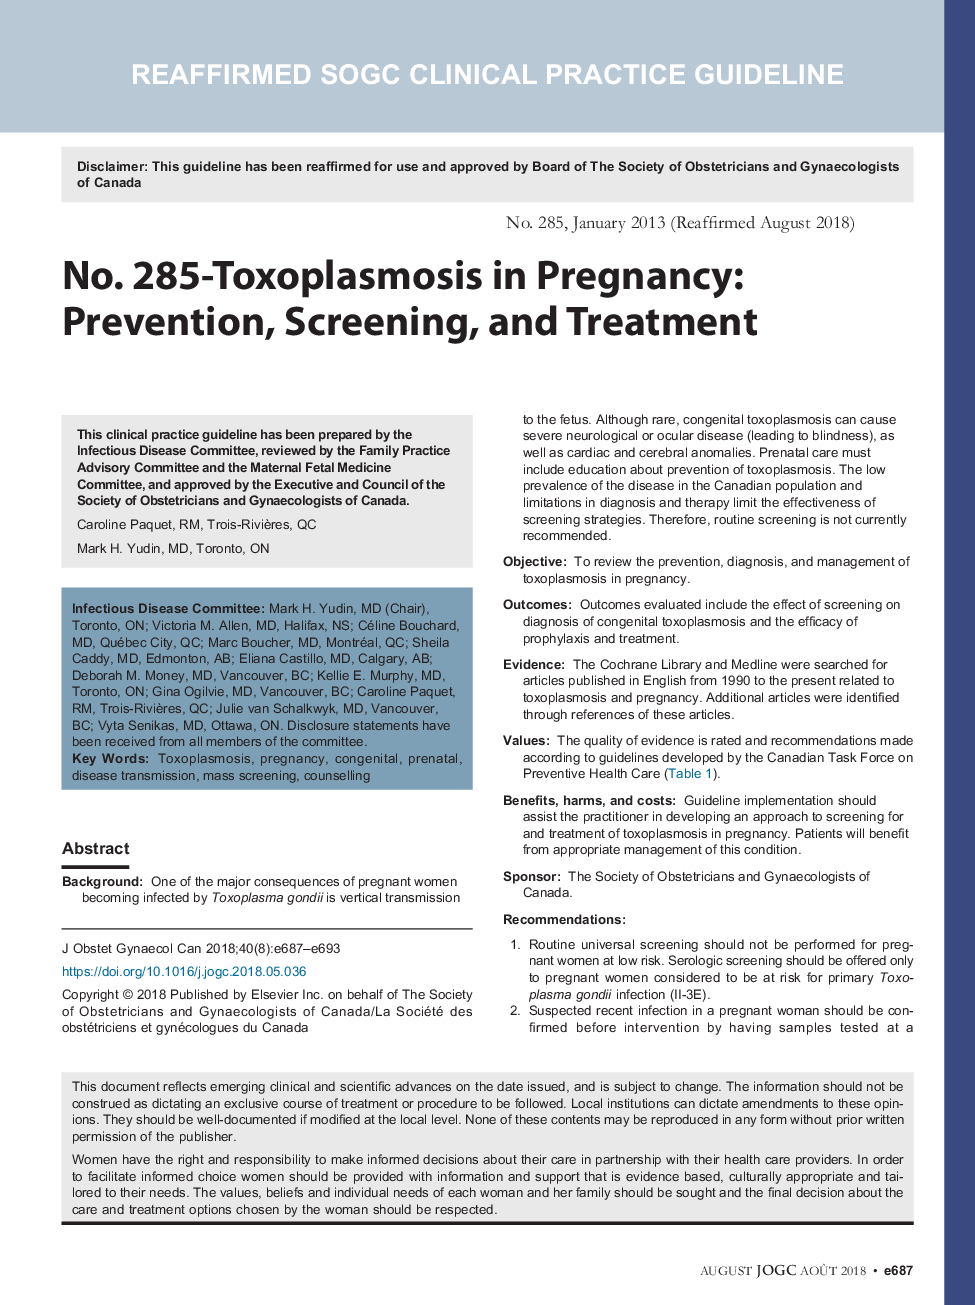 No. 285-Toxoplasmosis in Pregnancy: Prevention, Screening, and Treatment